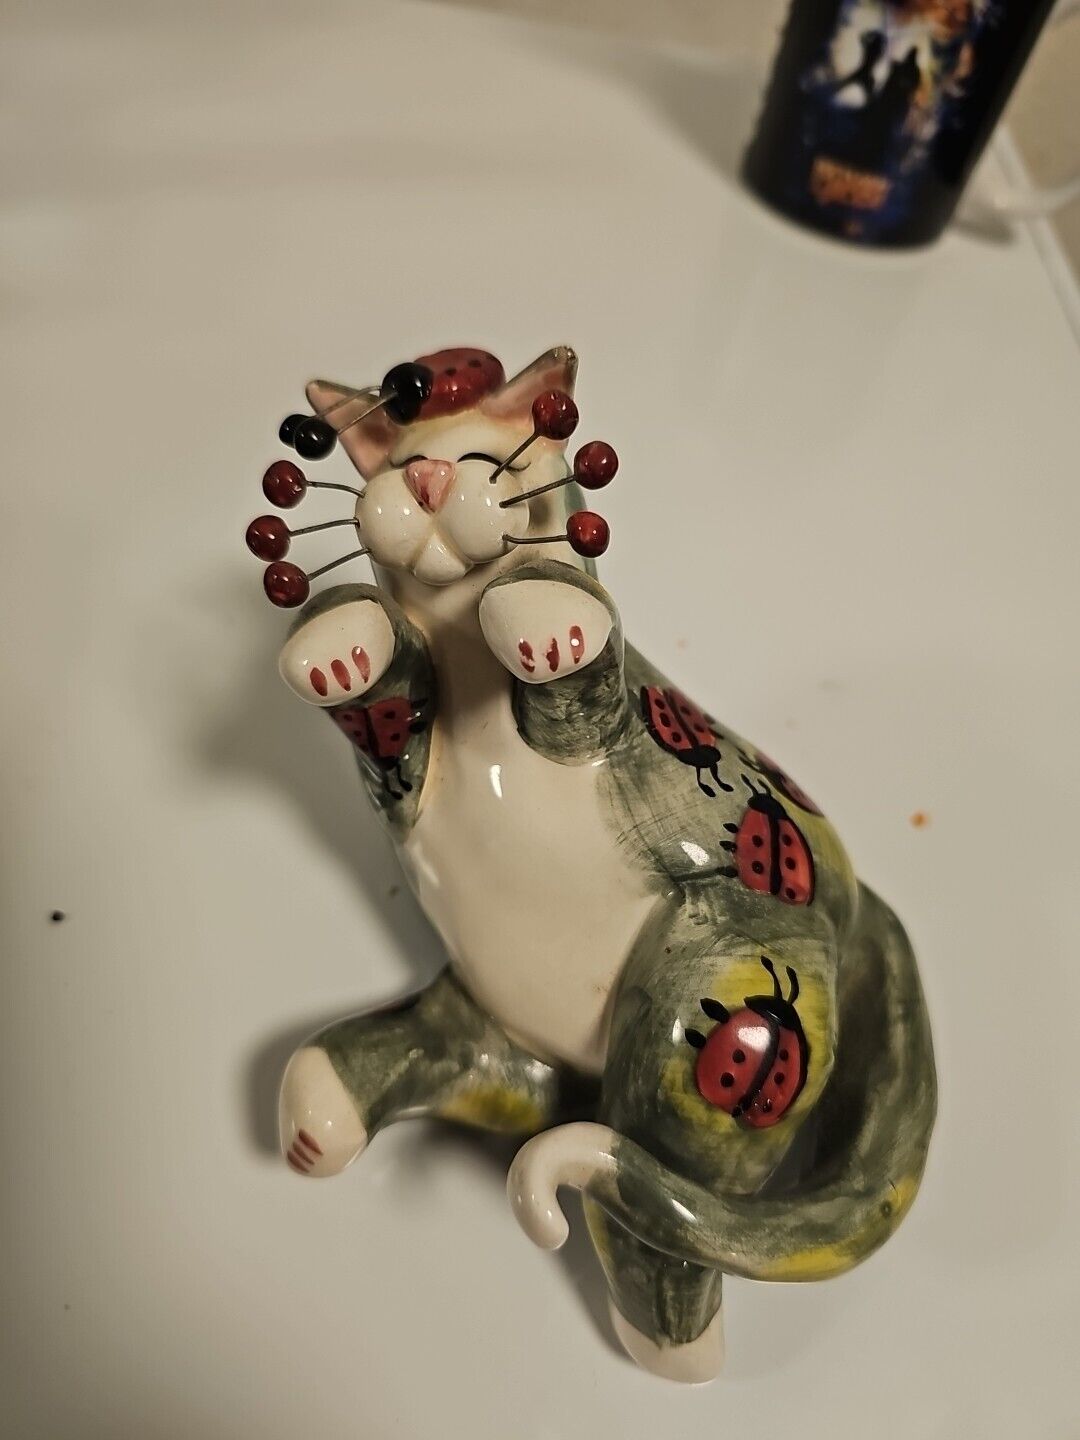 Annaco Creations 2001 Amy Lacombe Whimsical Cat/Kitten with Lady Bugs Figurine